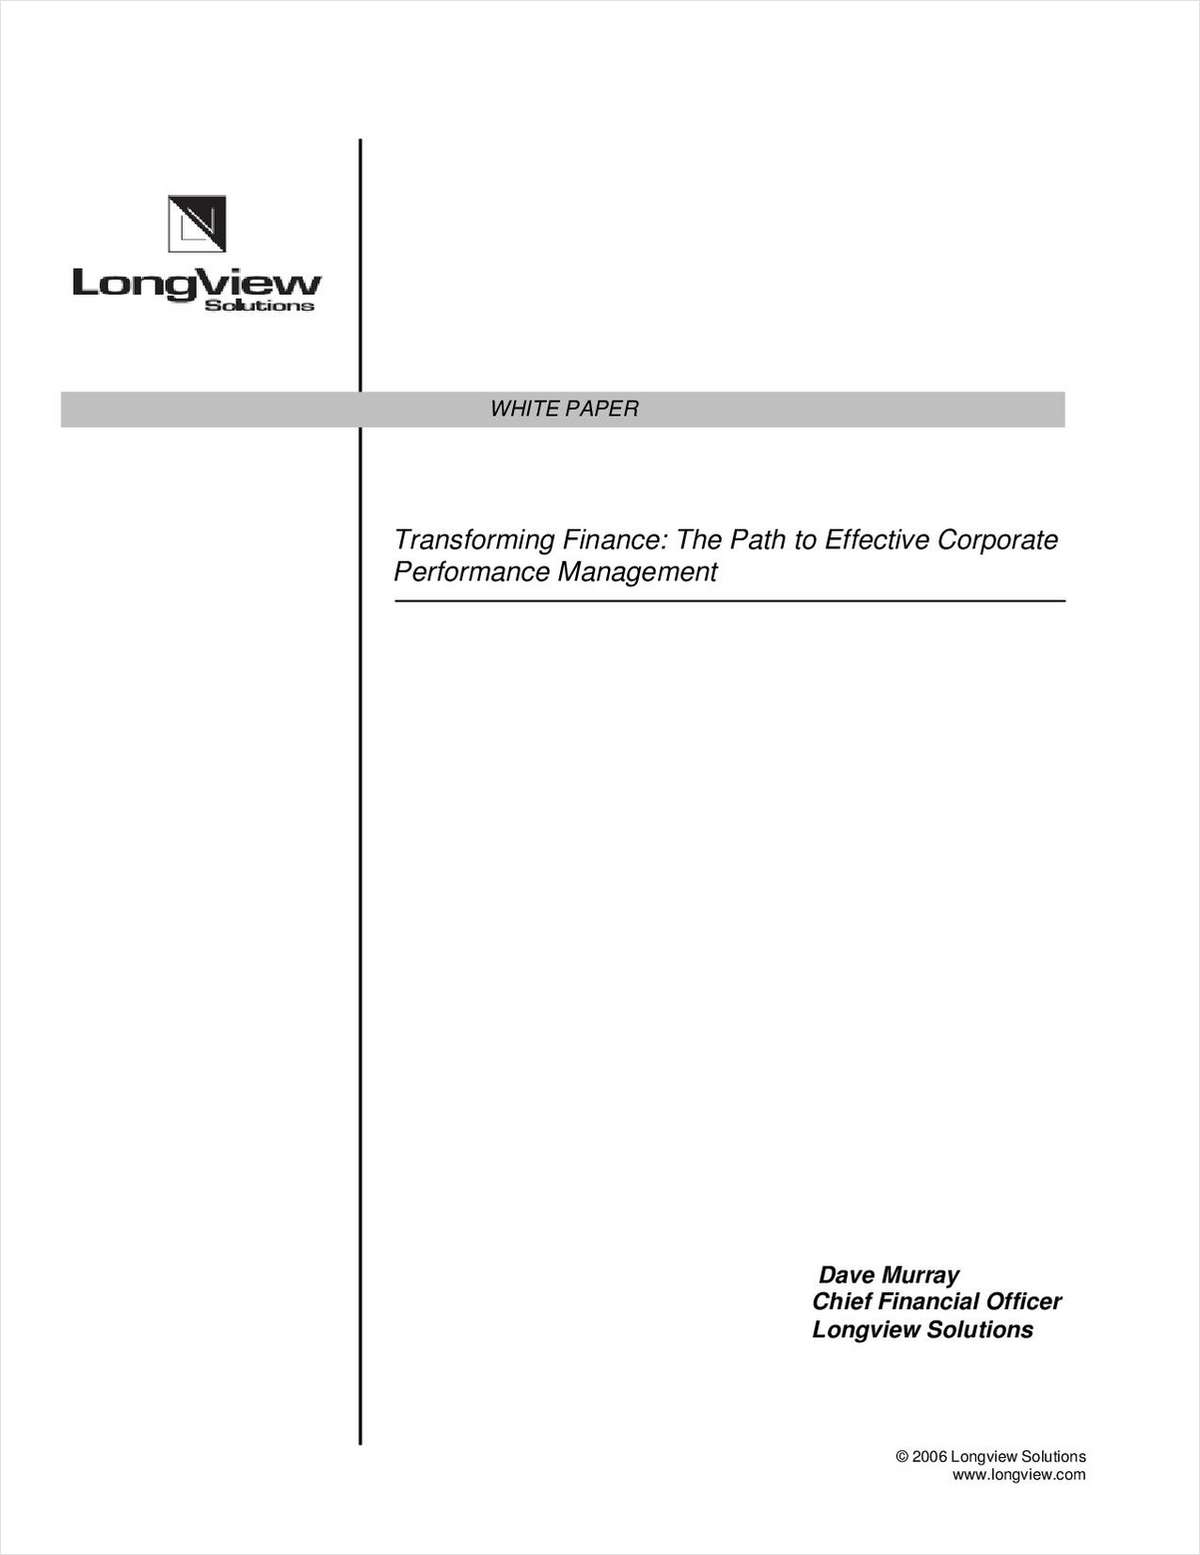 Transforming Finance: The Path to Effective Corporate Performance Management